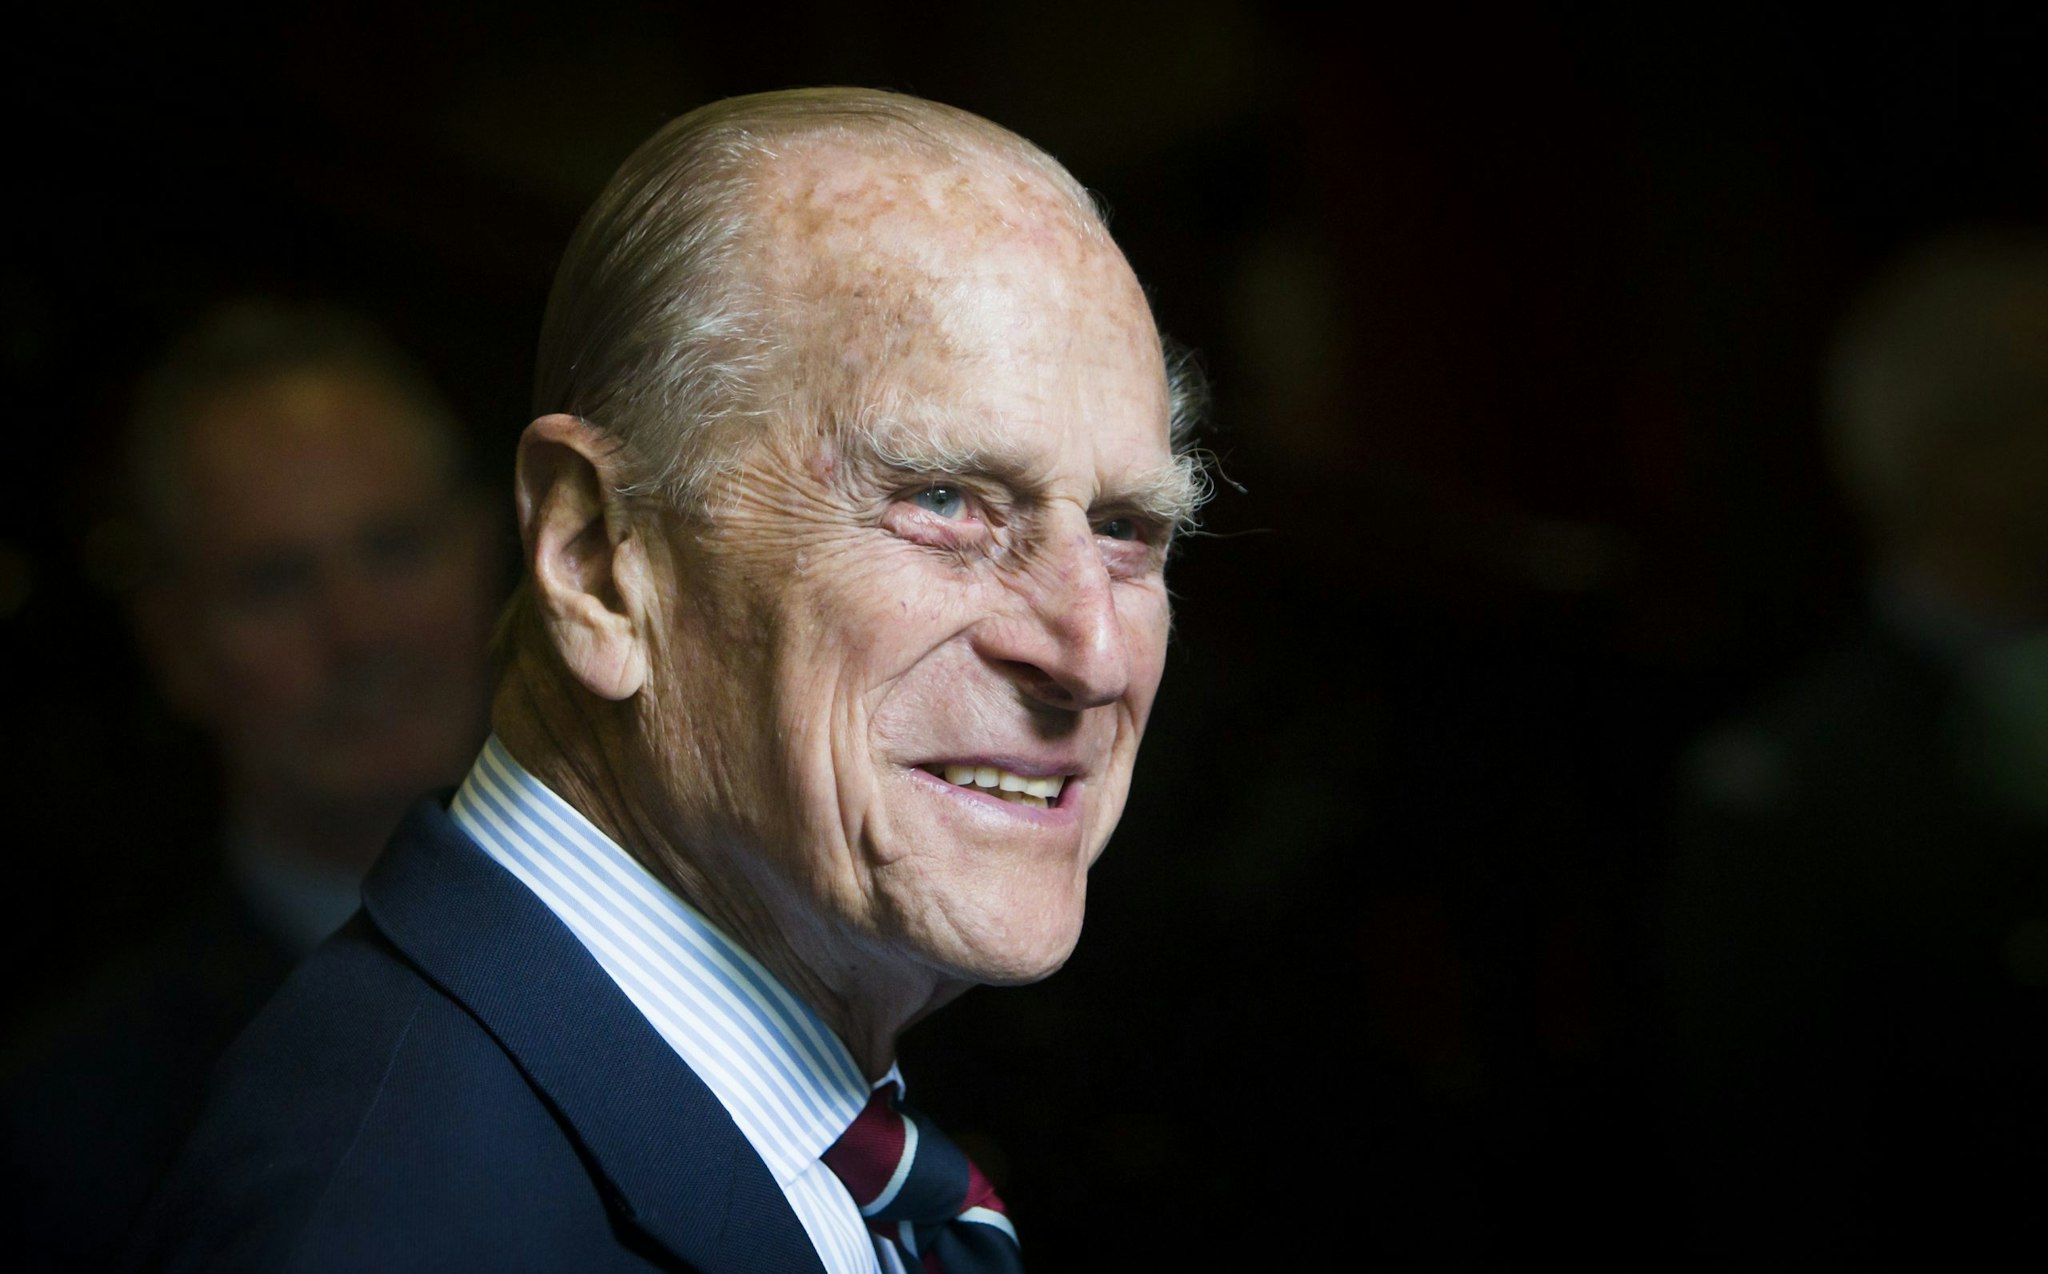 EDINBURGH, UNITED KINGDOM - JULY 04: Prince Philip, Duke of Edinburgh smiles during a visit to the headquarters of the Royal Auxiliary Air Force's (RAuxAF) 603 Squadron on July 4, 2015 in Edinburgh, Scotland.